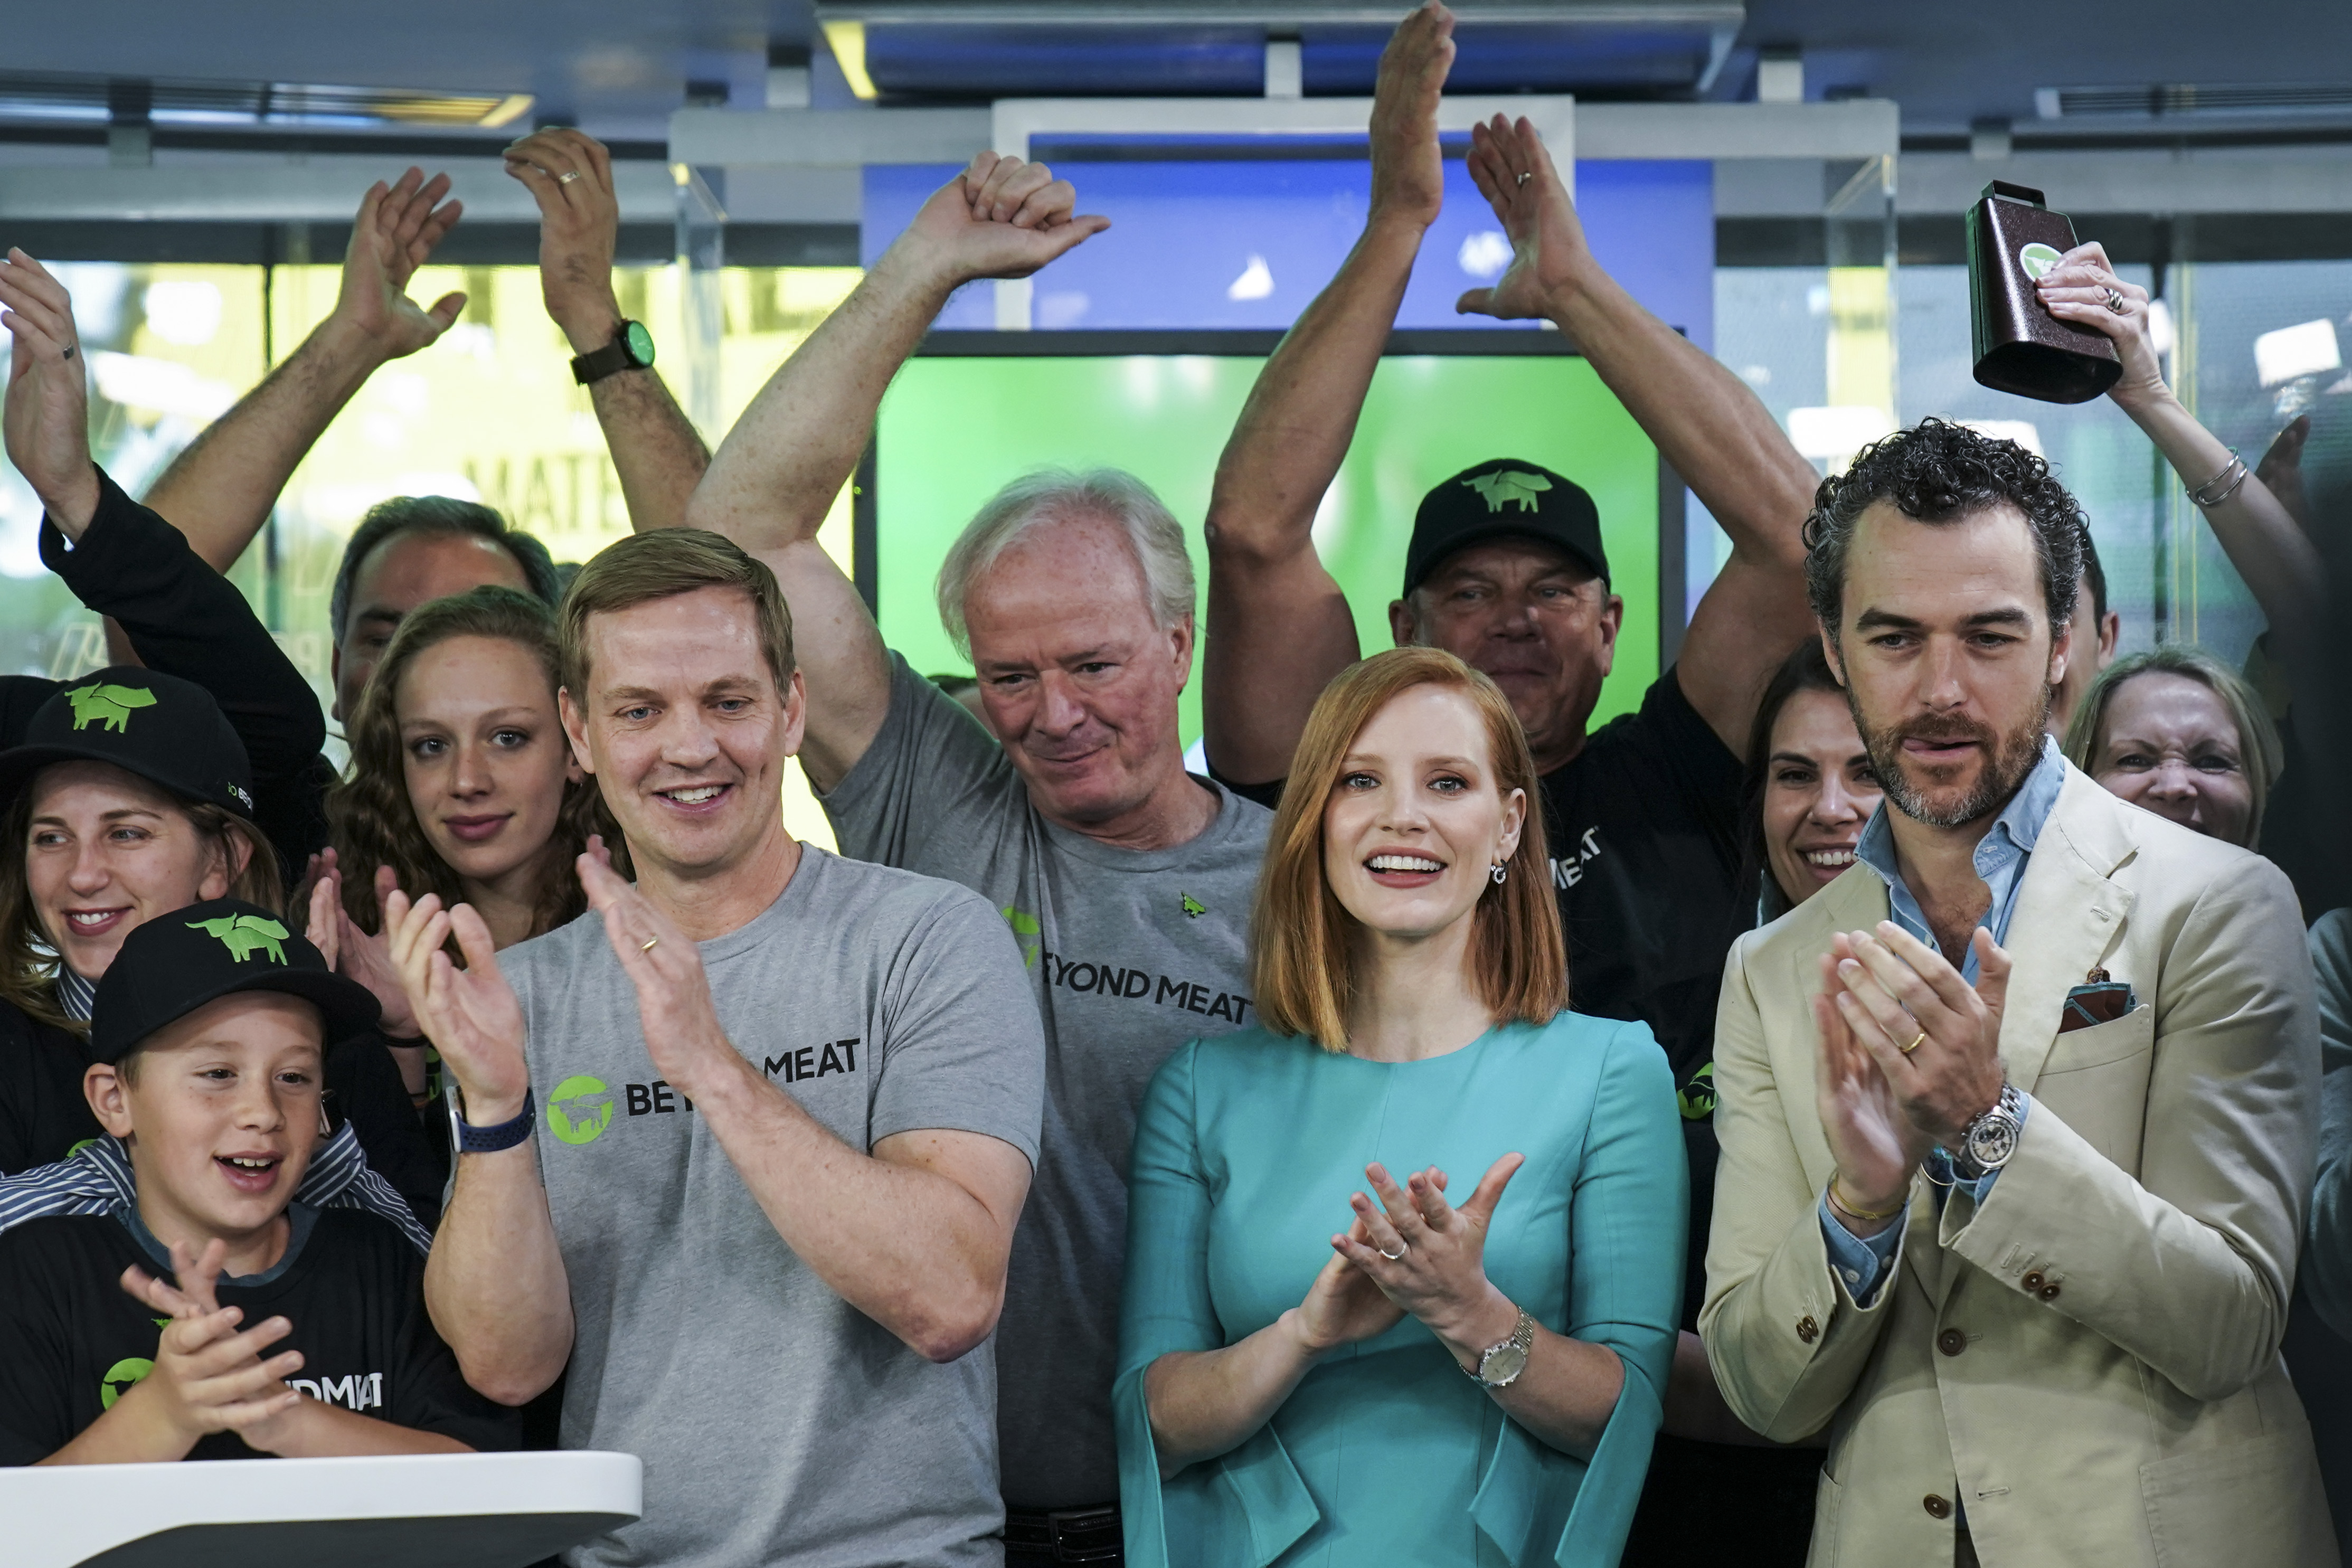 Beyond Meat investor Jessica Chastain attends the opening bell ceremony at Nasdaq MarketSite to mark the IPO of Beyond Meat, May 2, 2019 in New York City. The company had the best U.S. IPO of the year so far. (Drew Angerer—Getty Images)